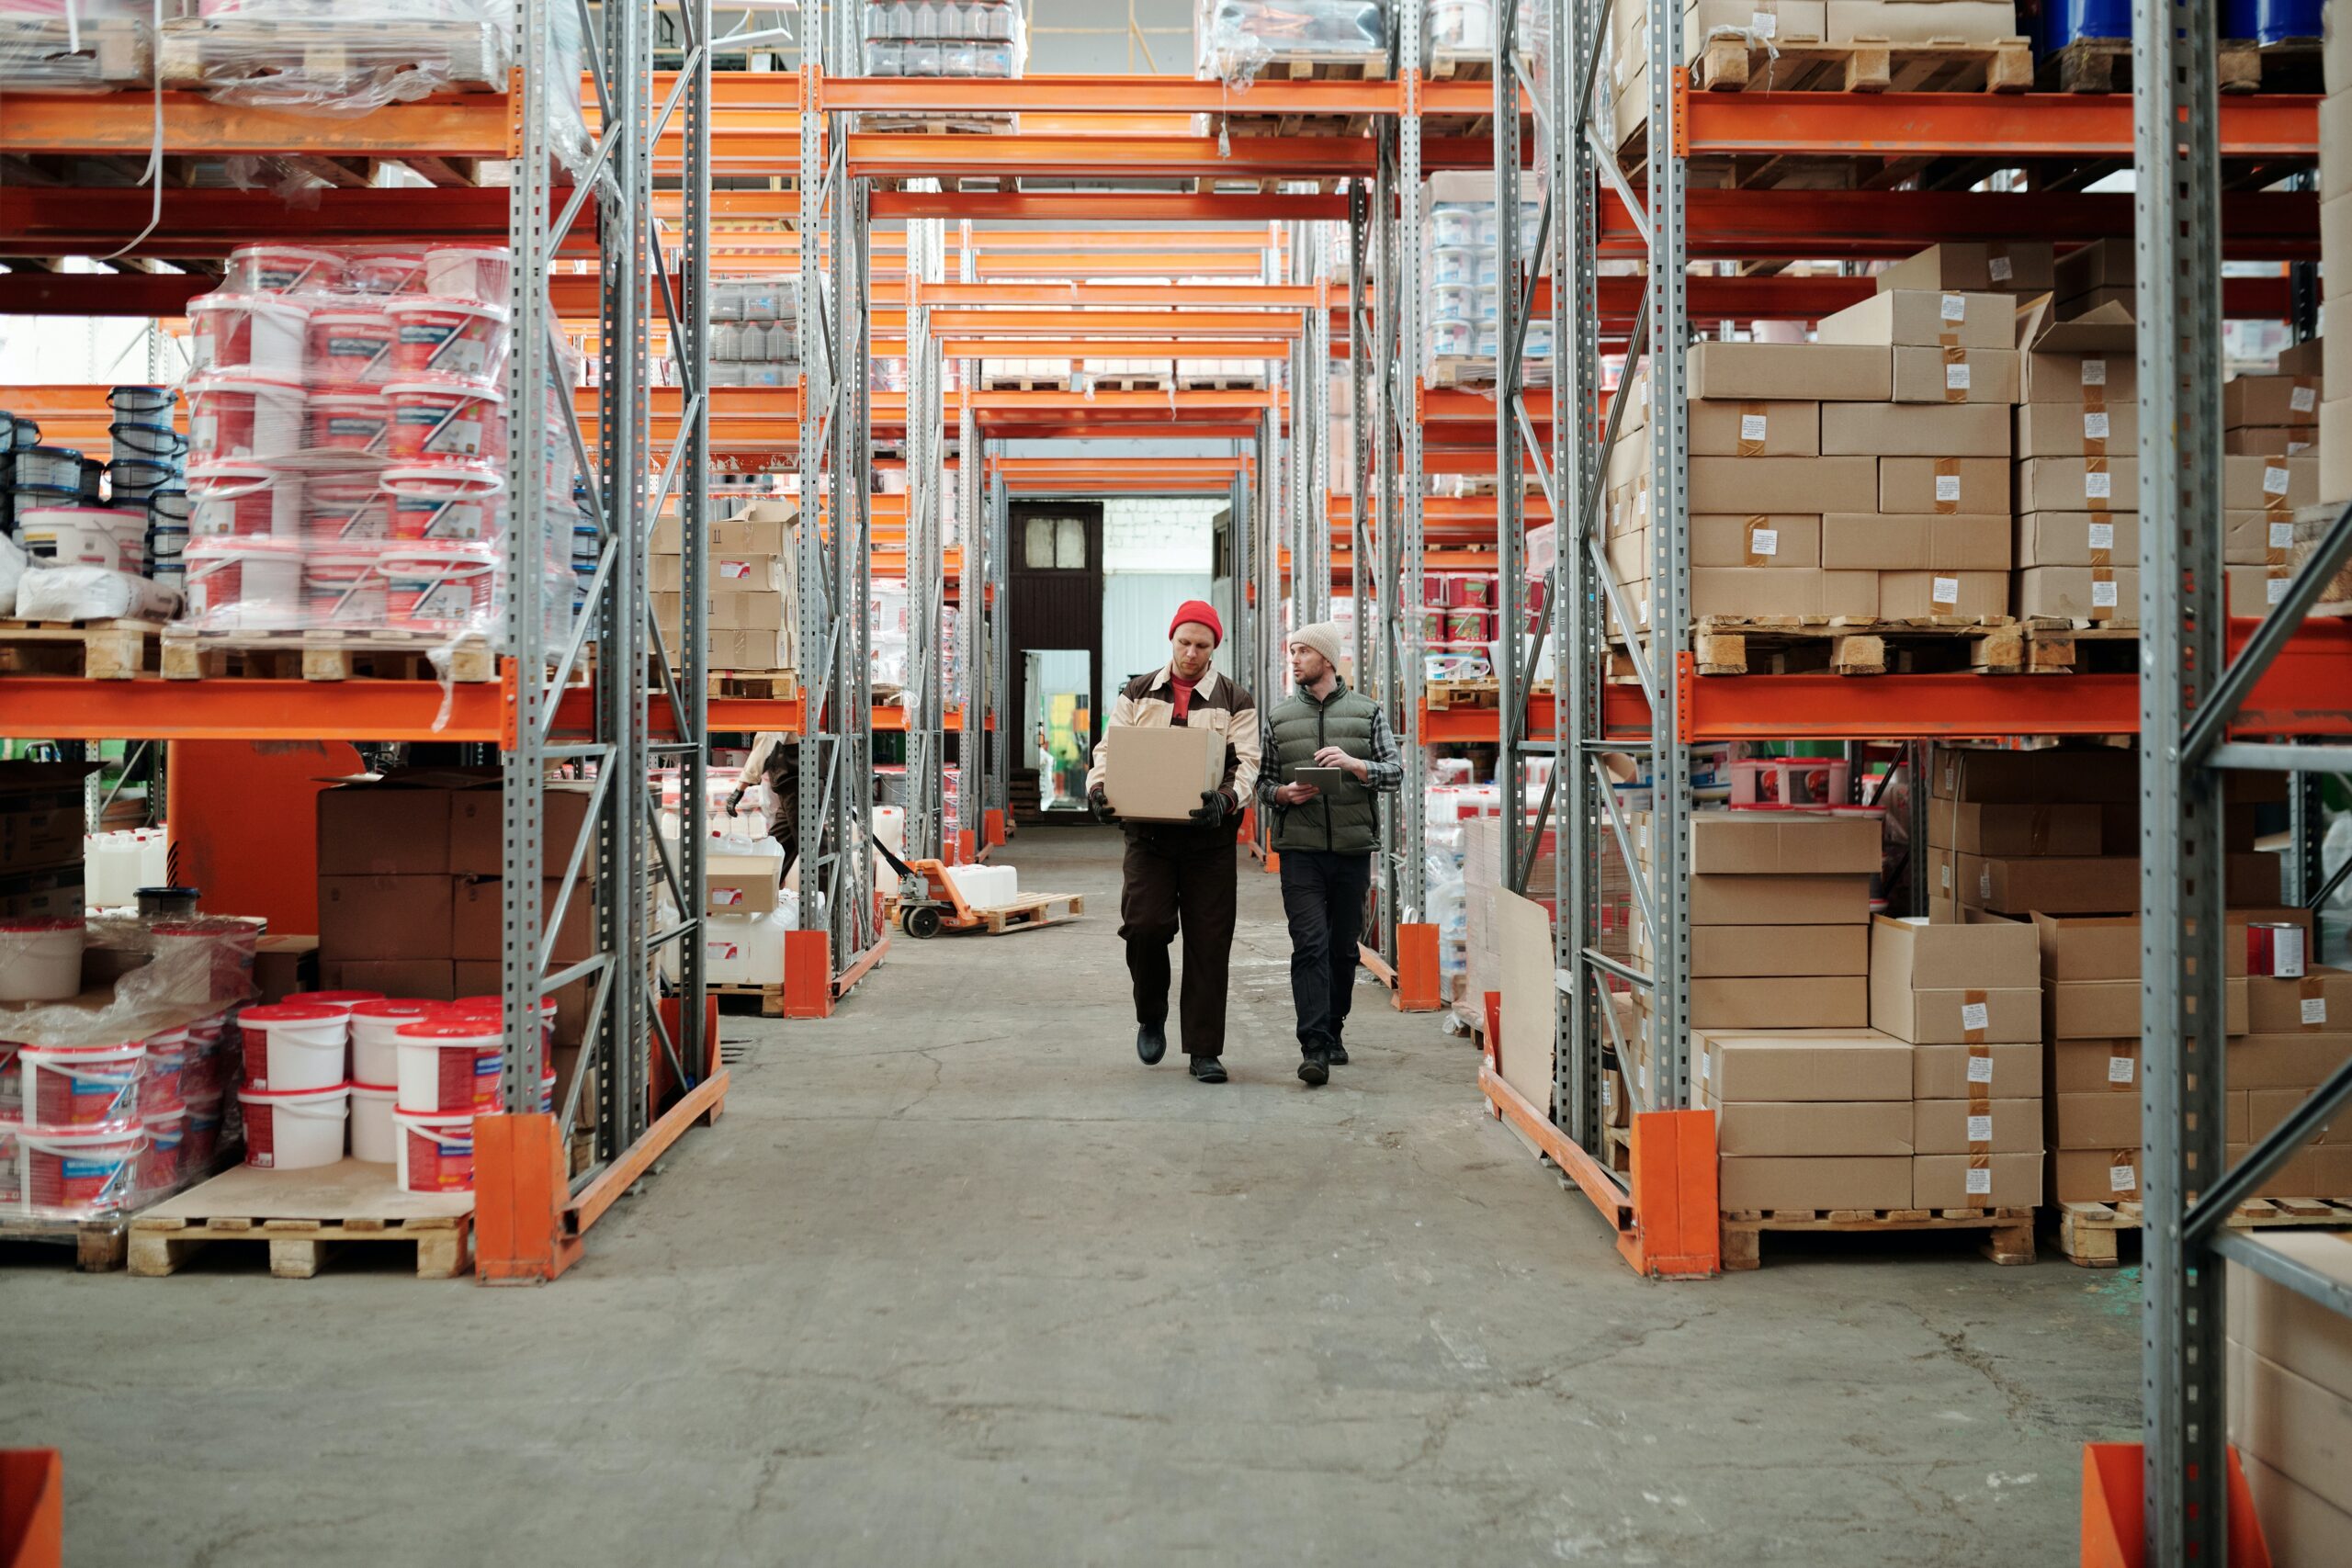 Supervisors overseeing inventory in a warehouse